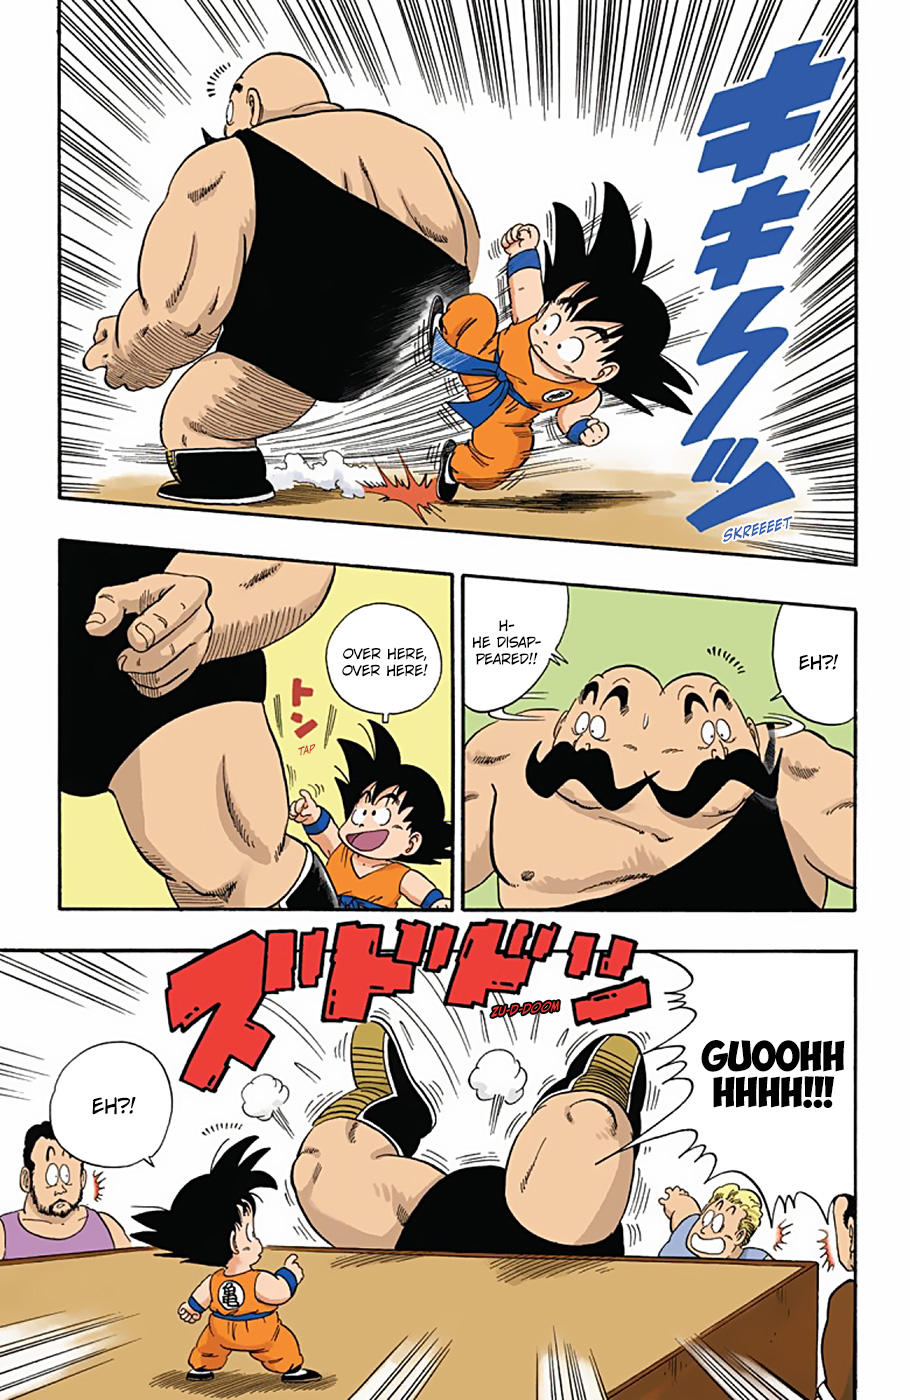 Dragon Ball - Full Color Edition Vol.3 Chapter 33: The Power Of Training!! page 11 - Mangakakalot